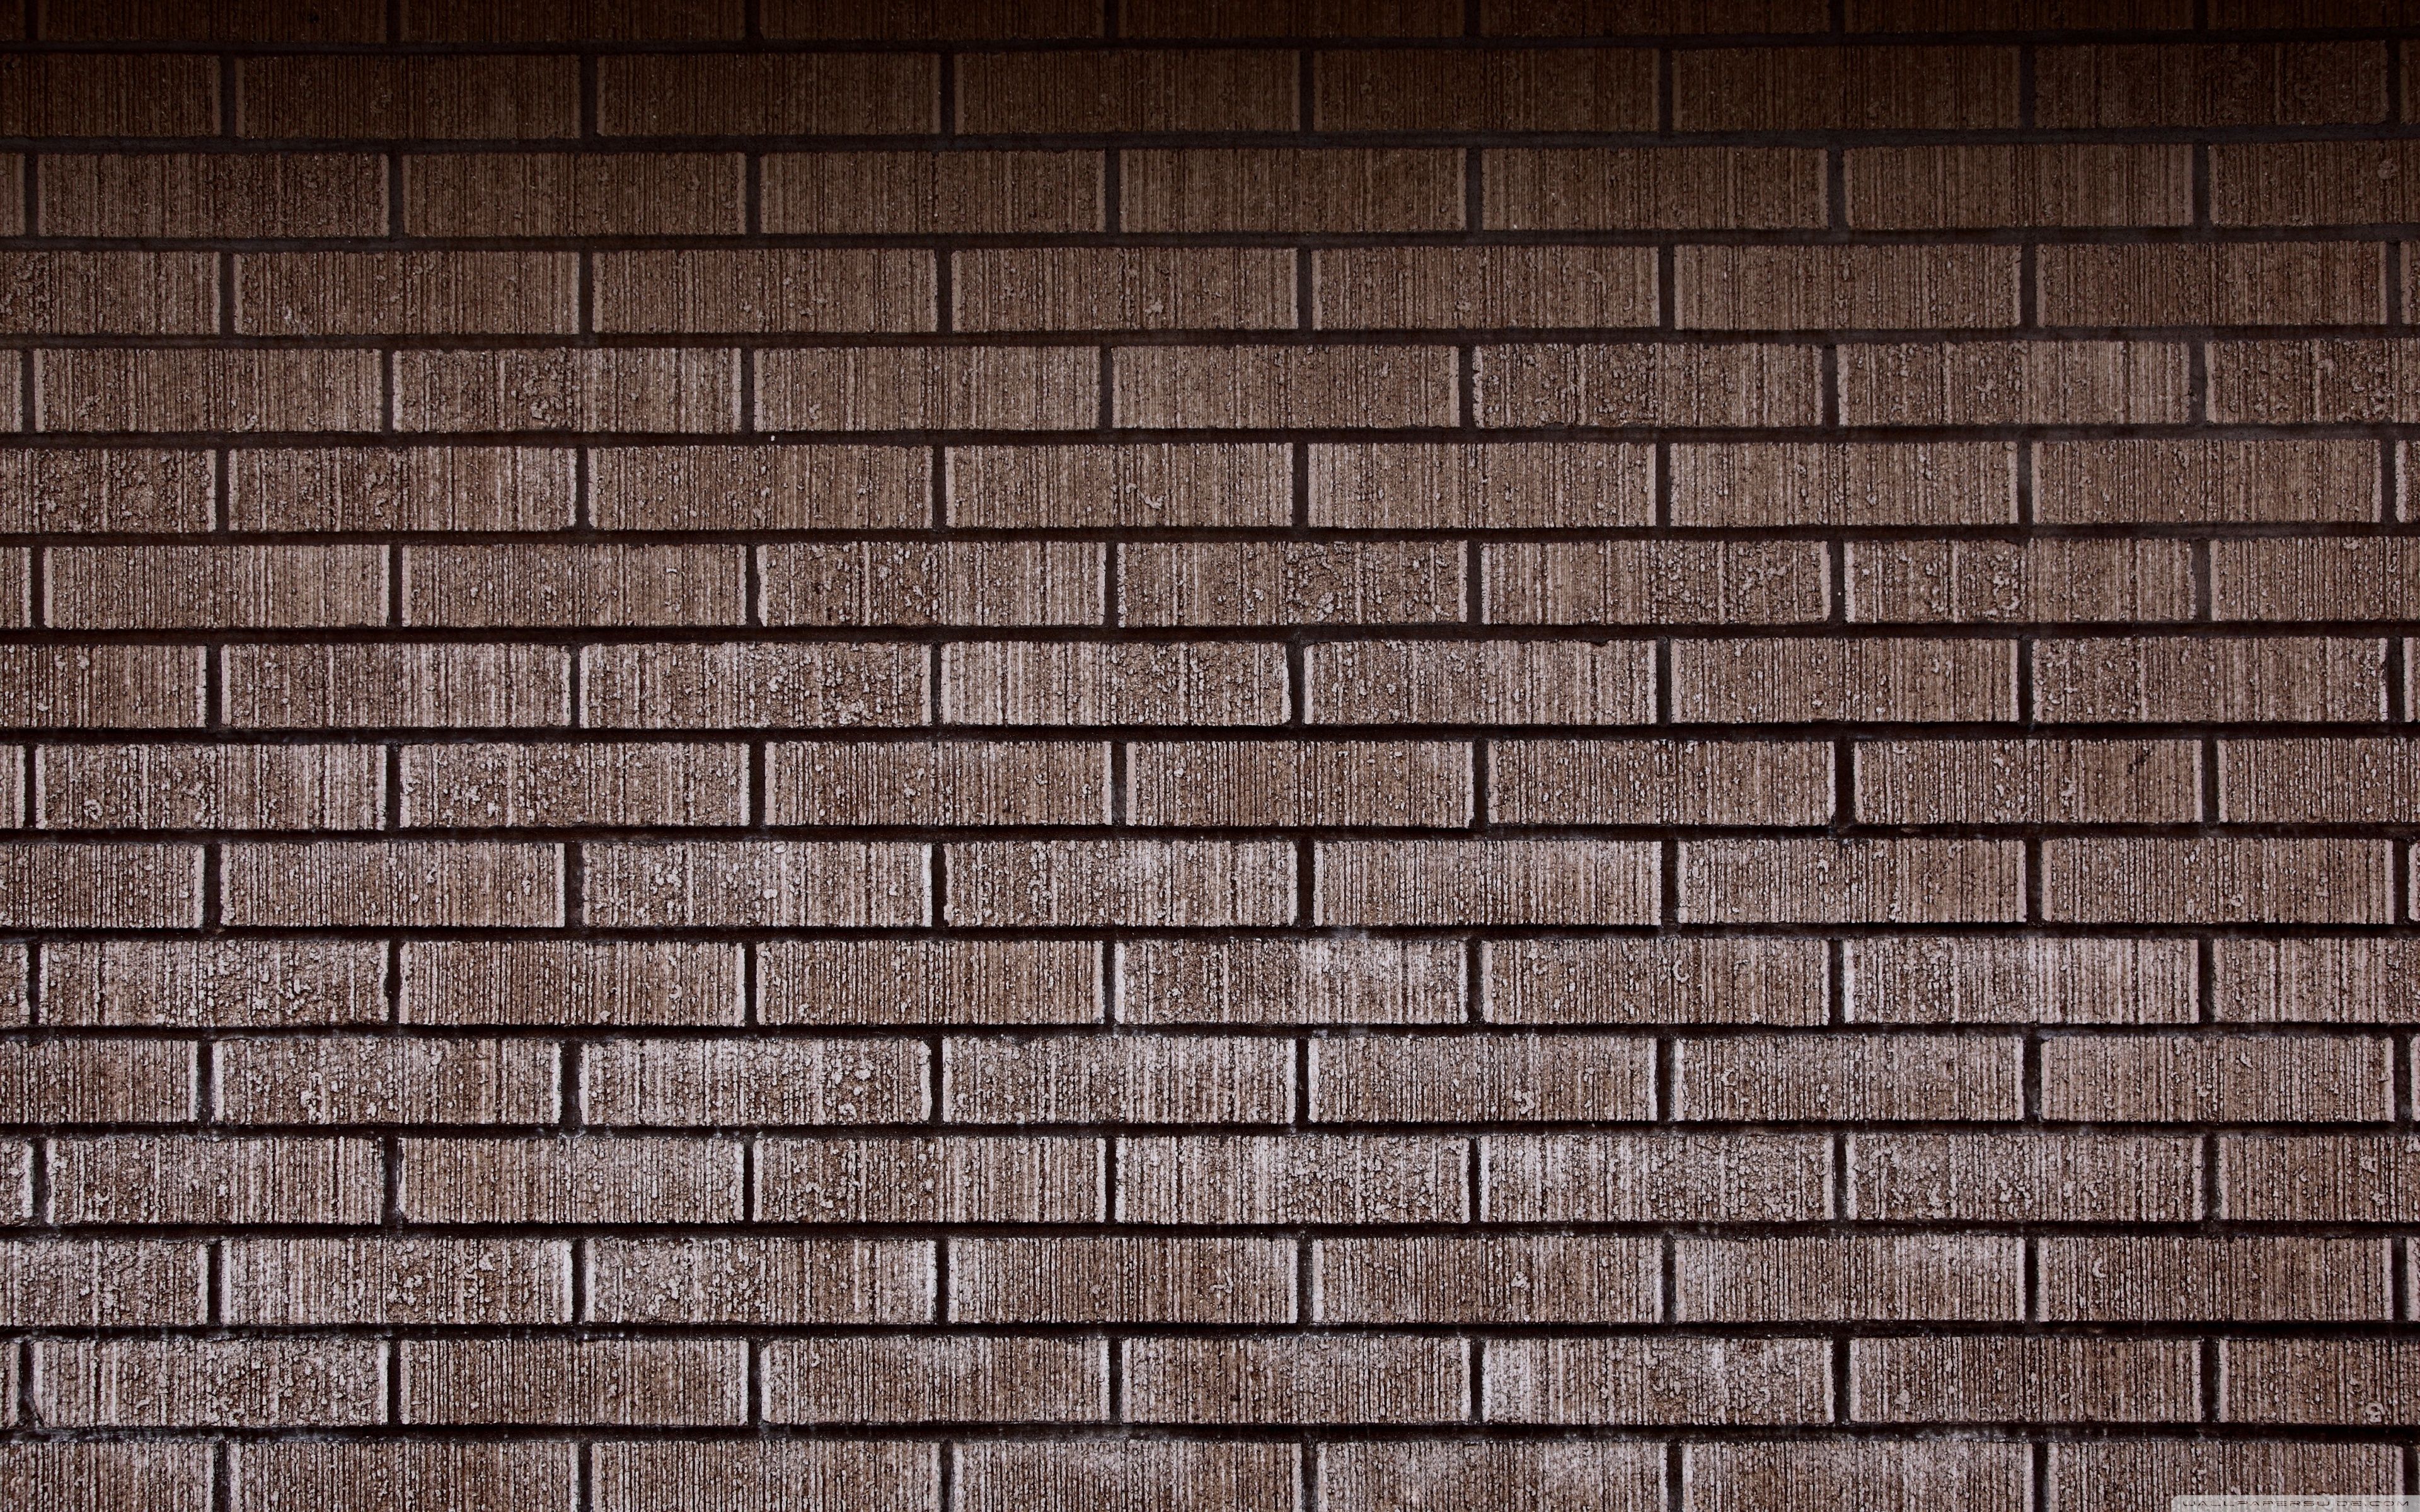 Brick High Definition Backgrounds 6893 - HD Wallpapers Site